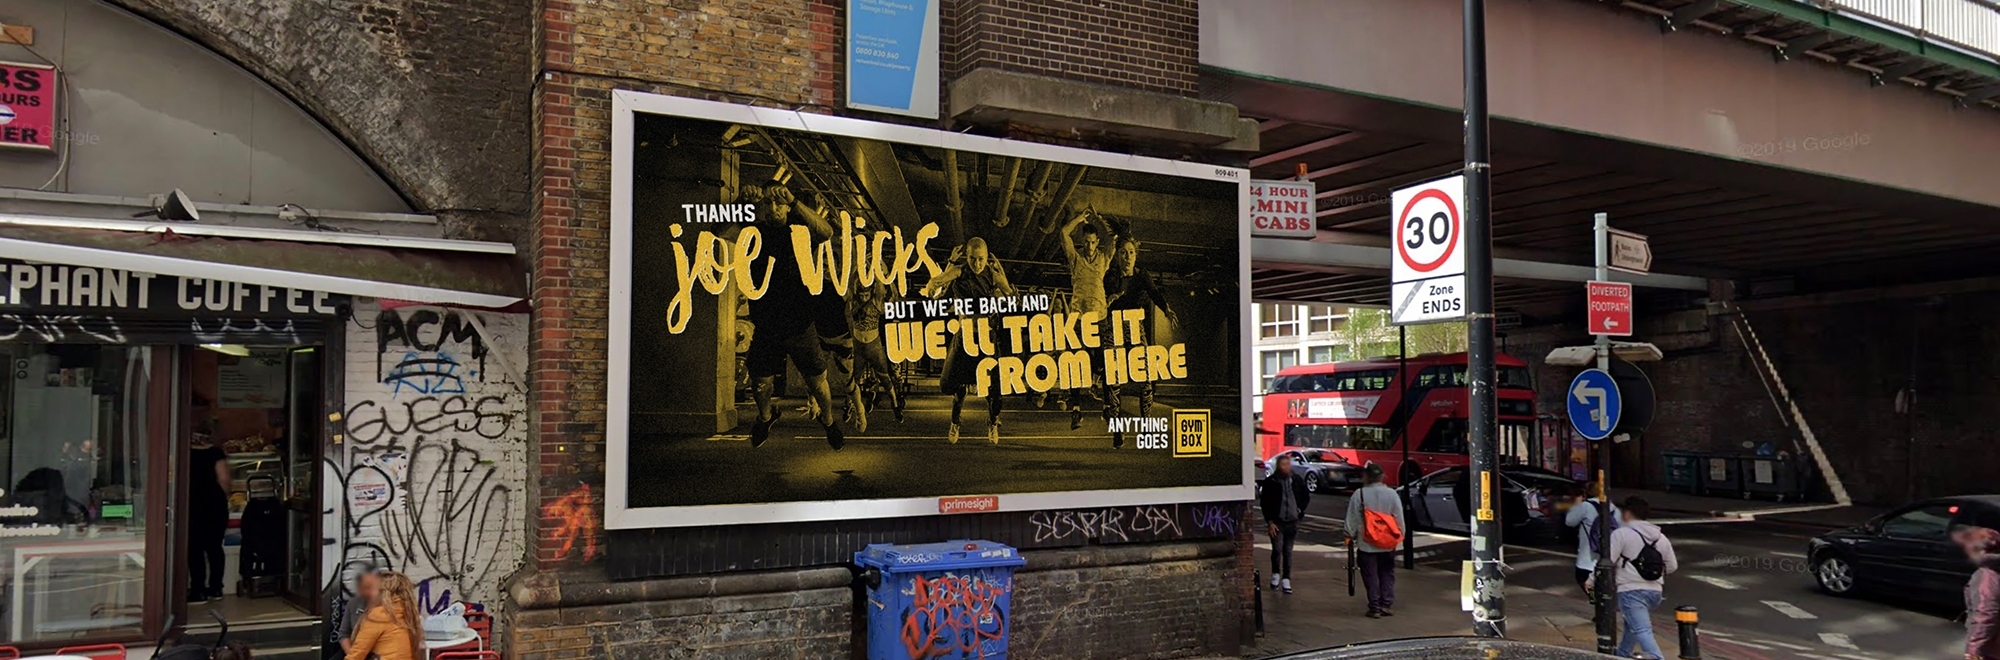 BMB launches new advertising campaign to position Gymbox as an antidote to boring gyms